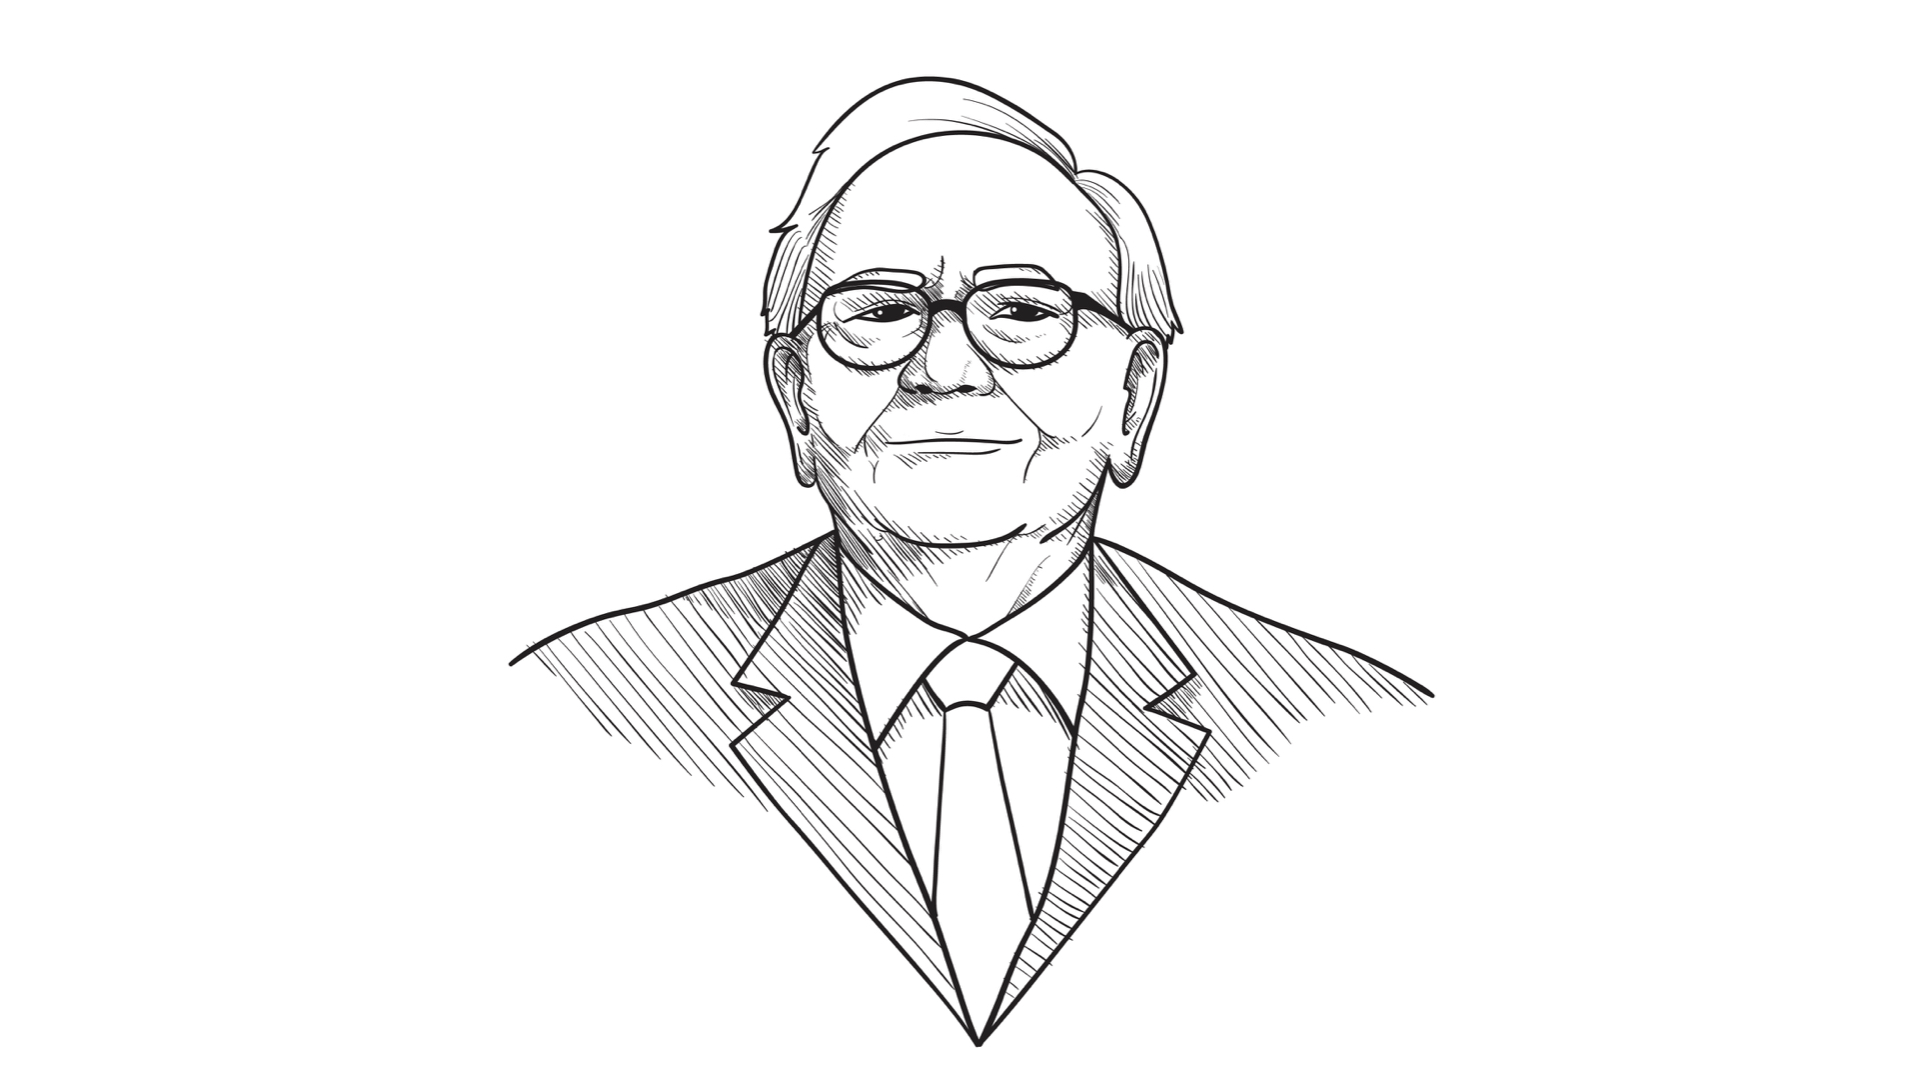 Warren Buffet's Rules - Trading Justice Podcast